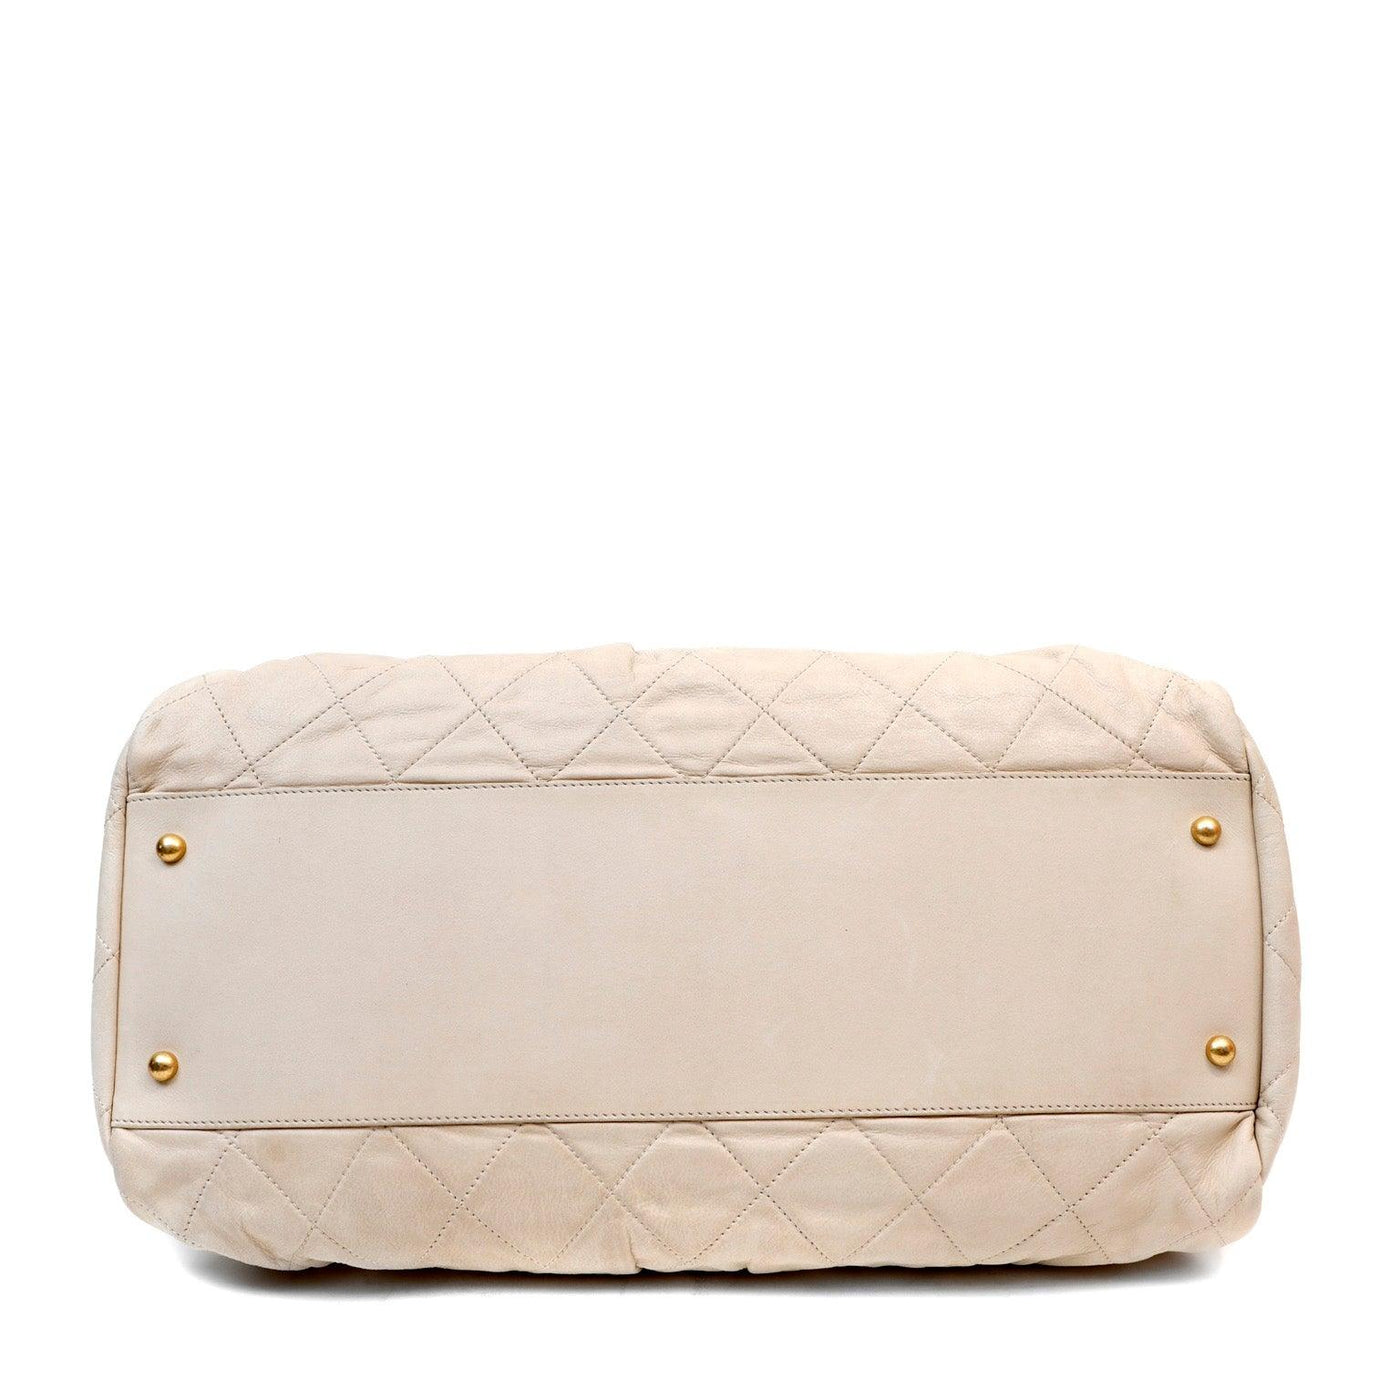 Chanel Beige Quilted Lambskin Day Tote - Only Authentics